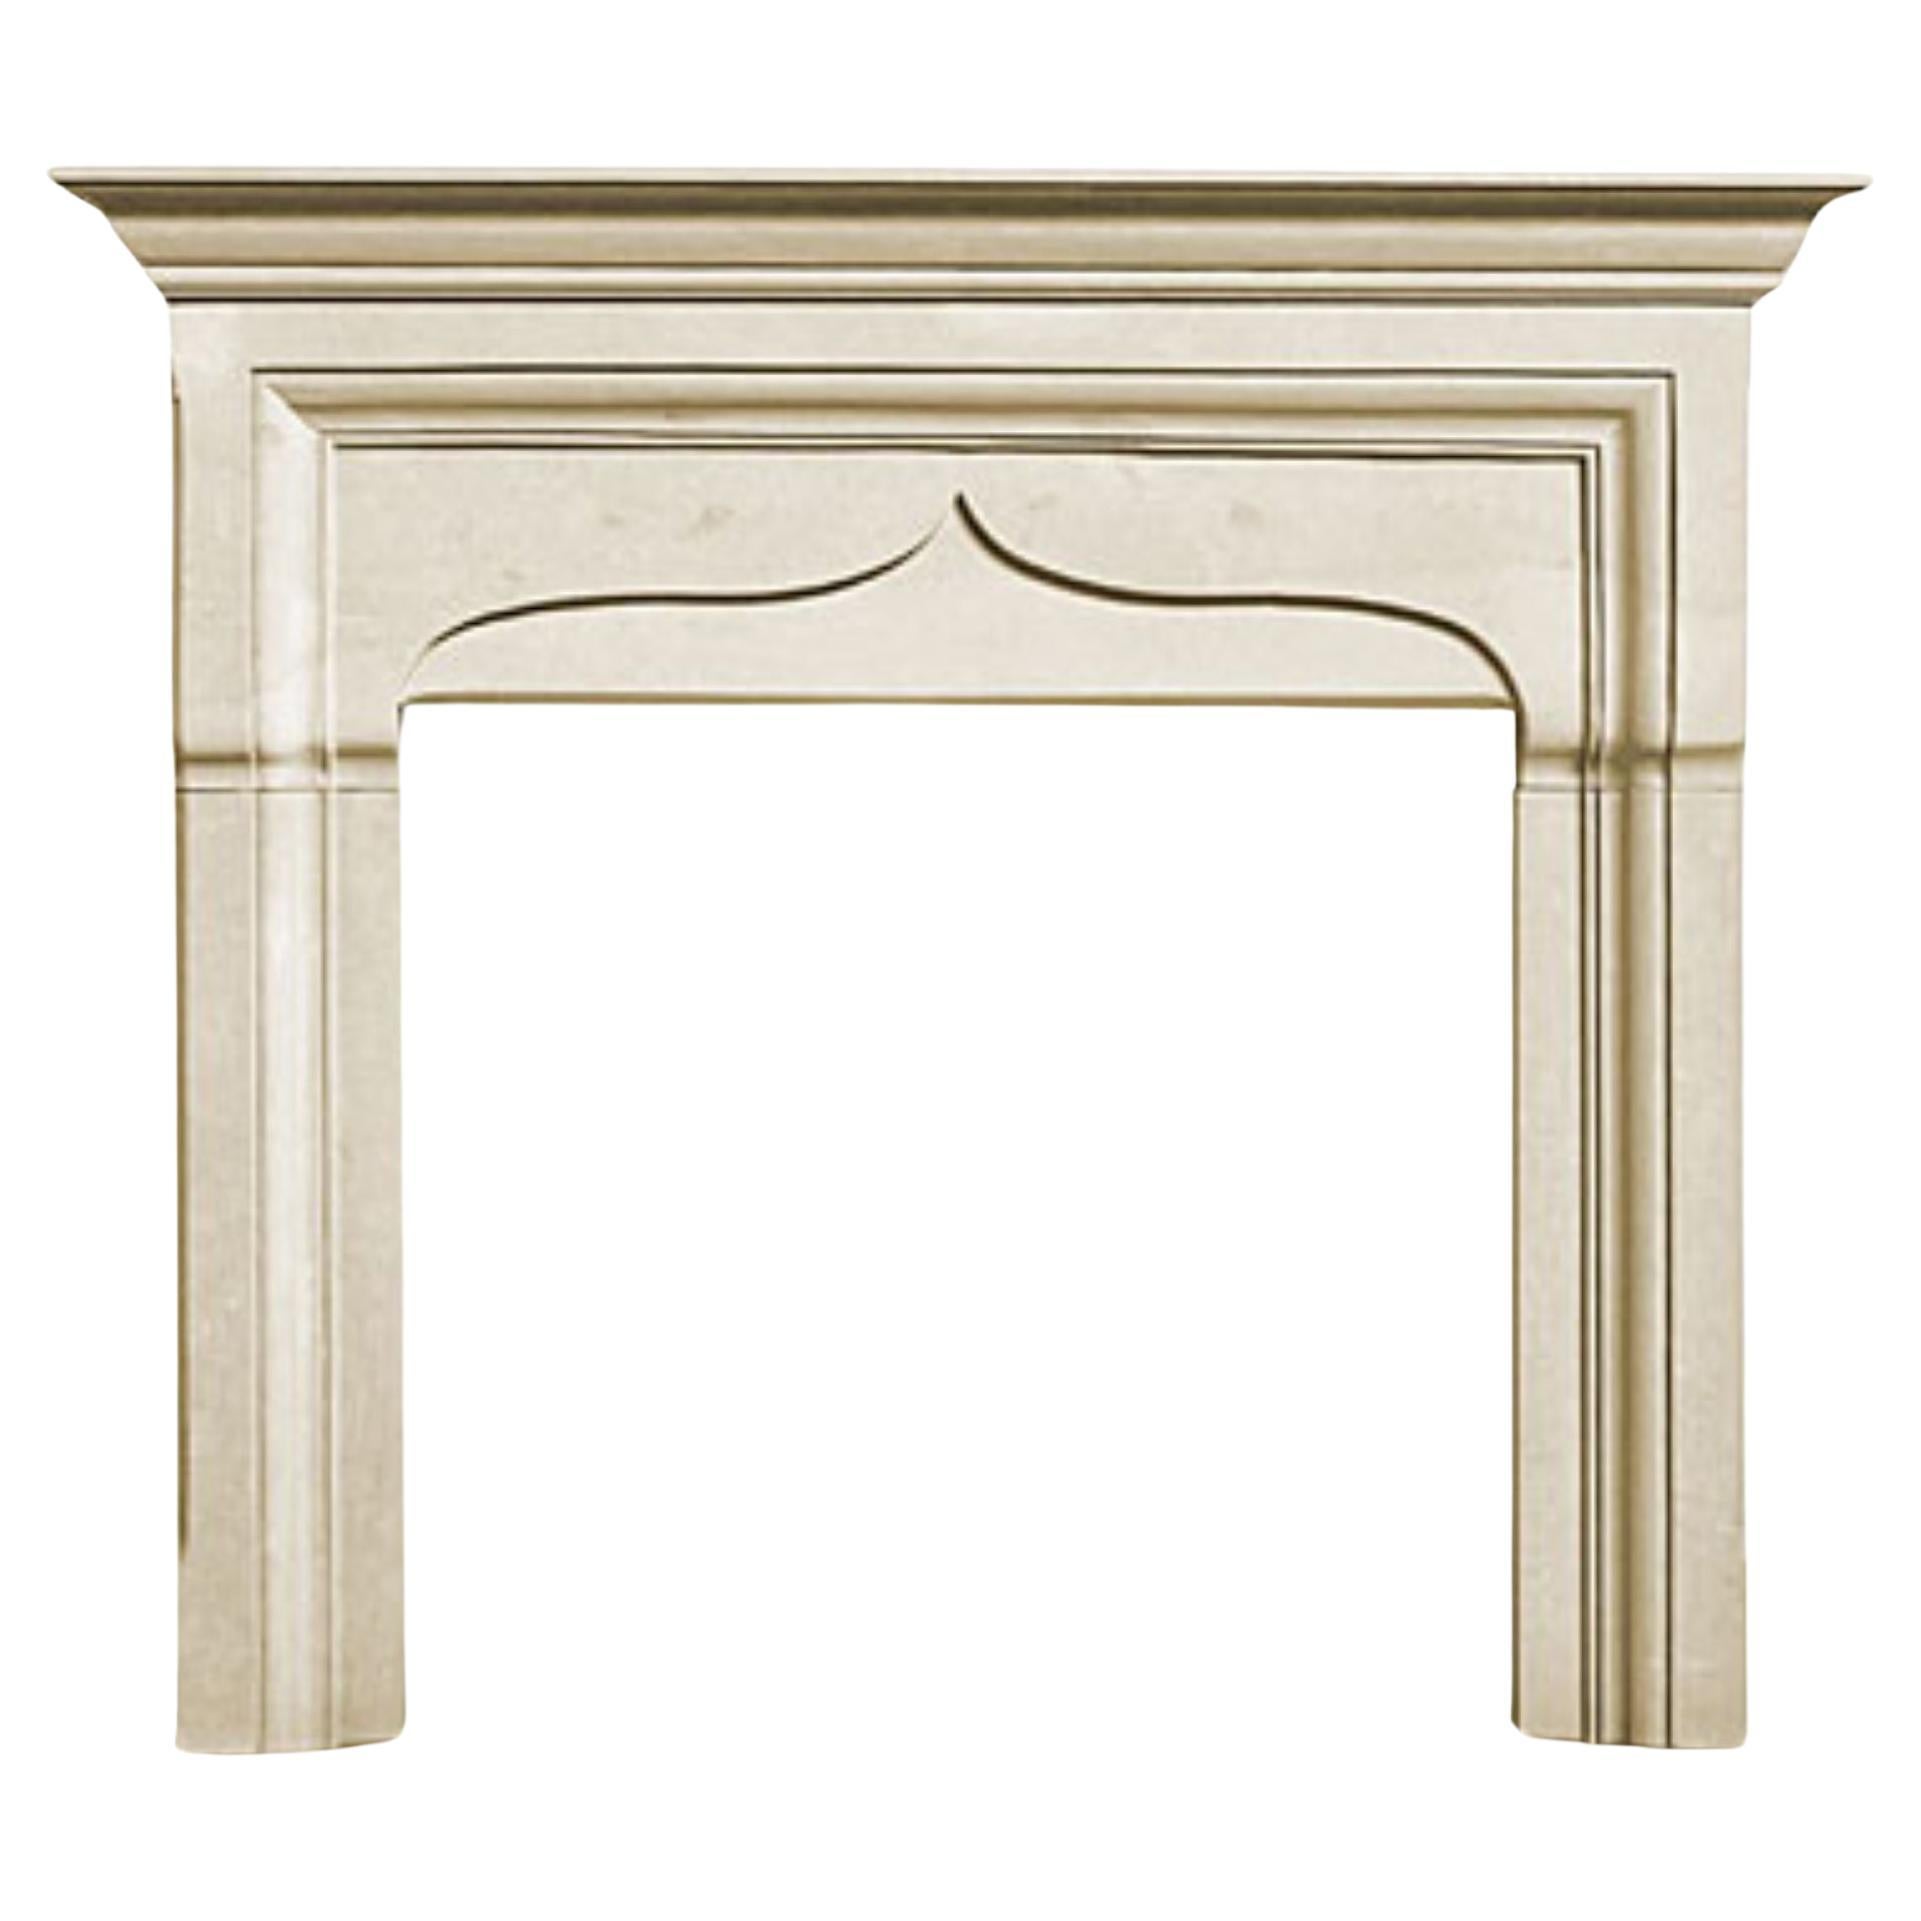 Tudor Fireplaces and Mantels